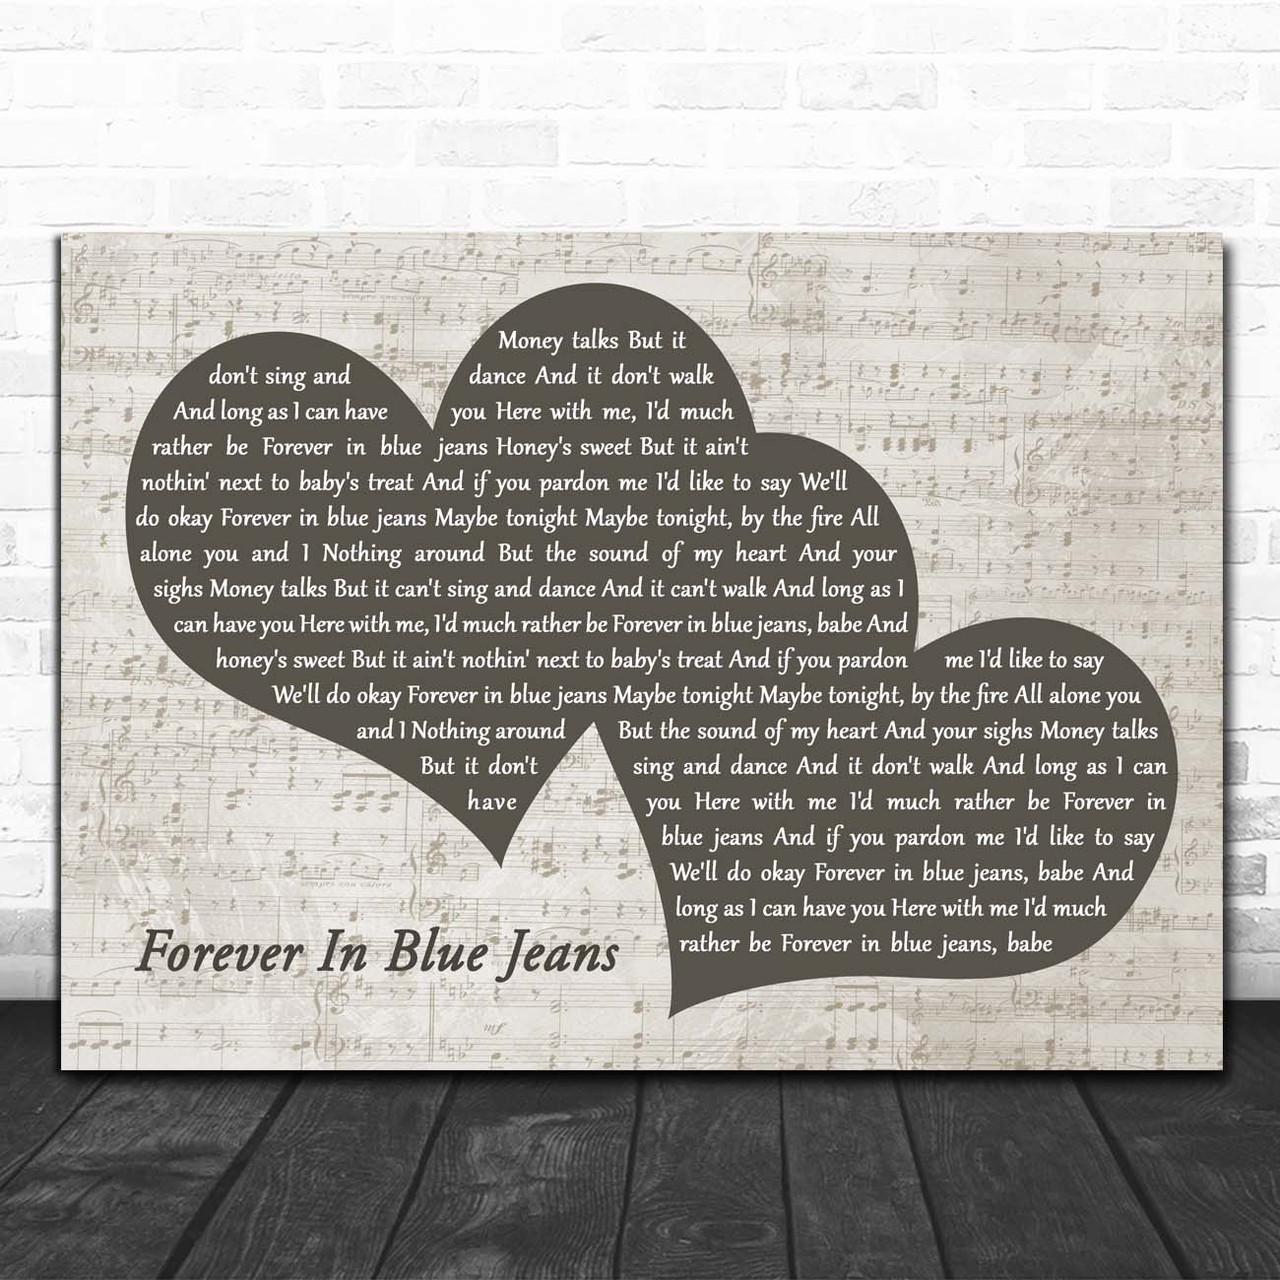 lyrics of forever in blue jeans | Discover